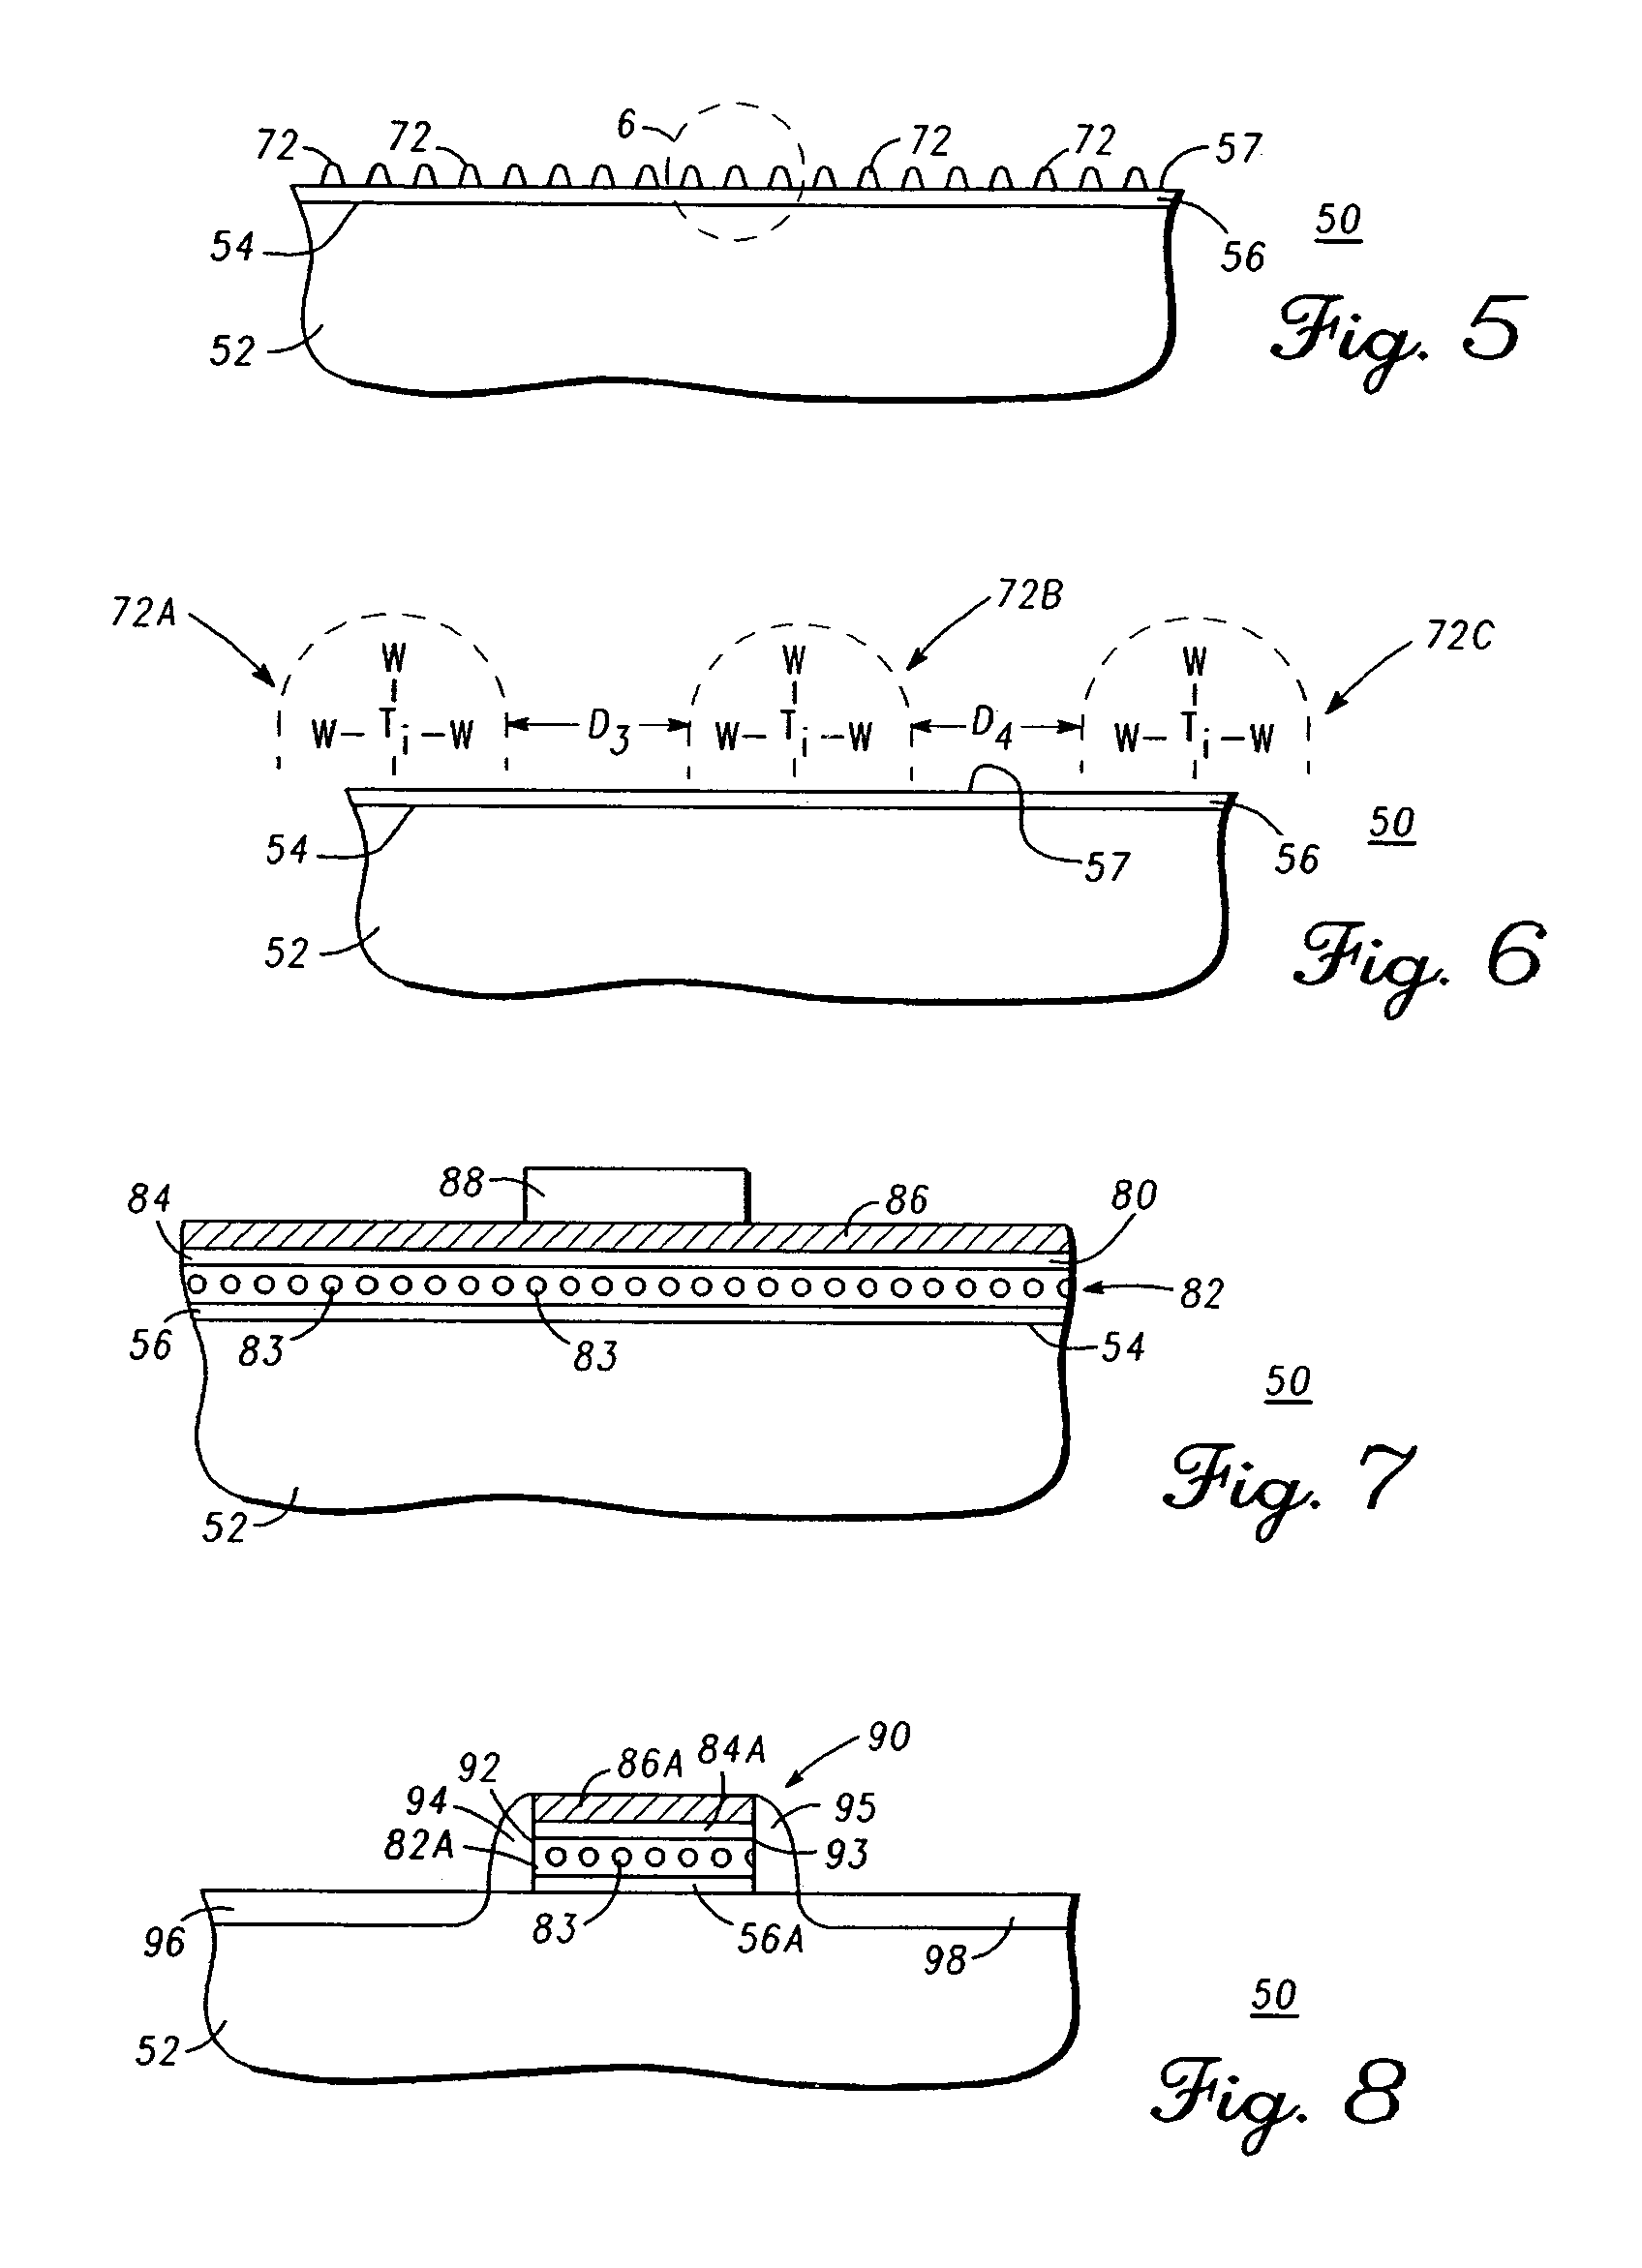 Method for manufacturing a memory device having a nanocrystal charge storage region